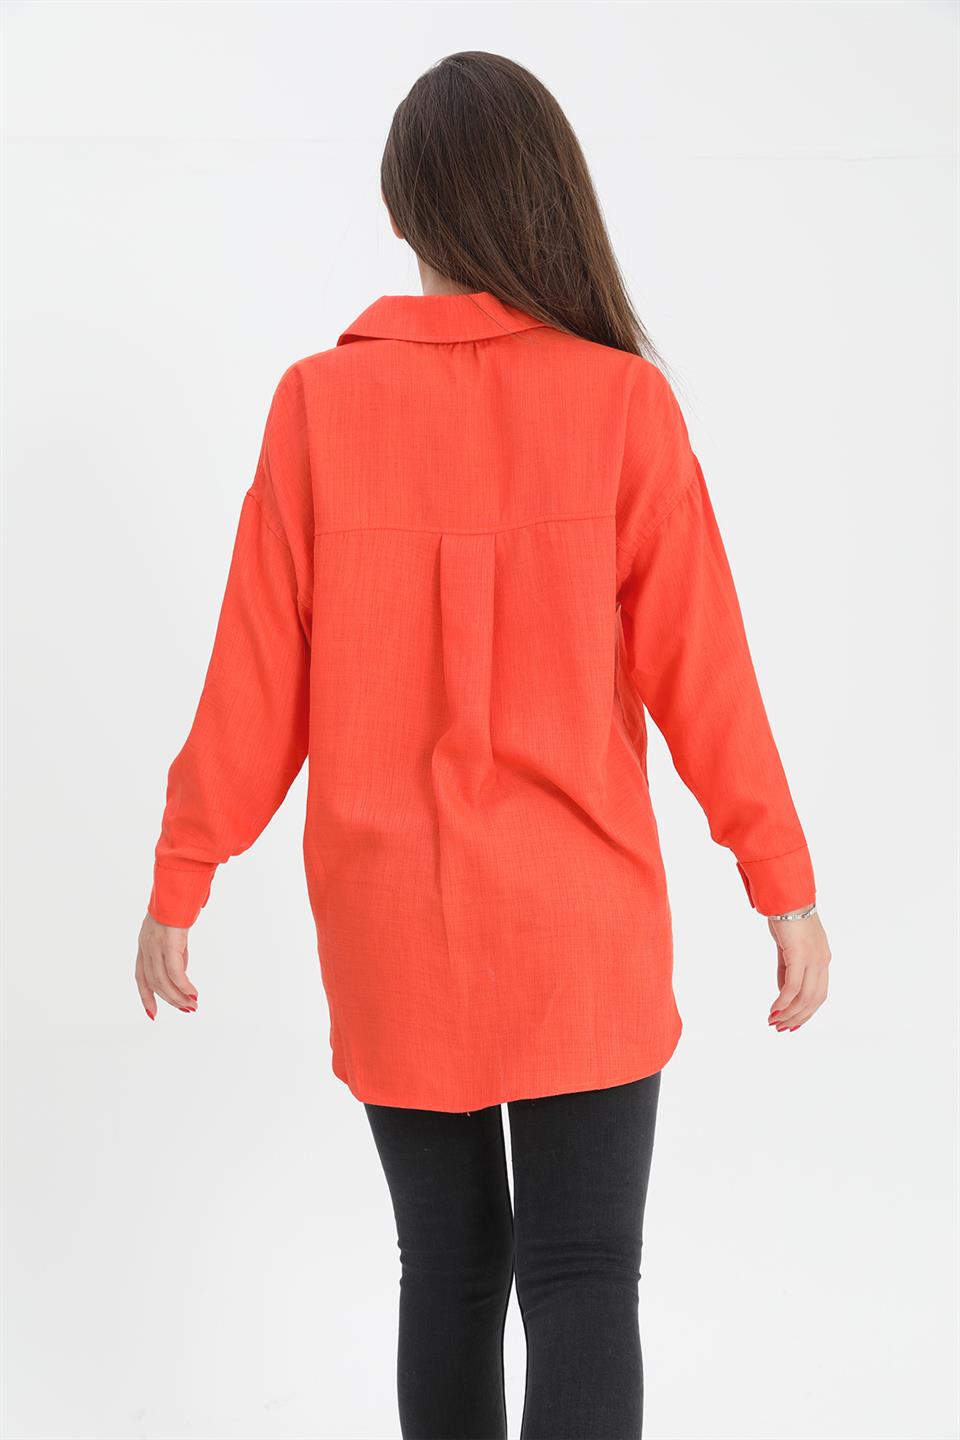 Women's Shirt With Linen Eye Embroidery - Orange - STREETMODE™